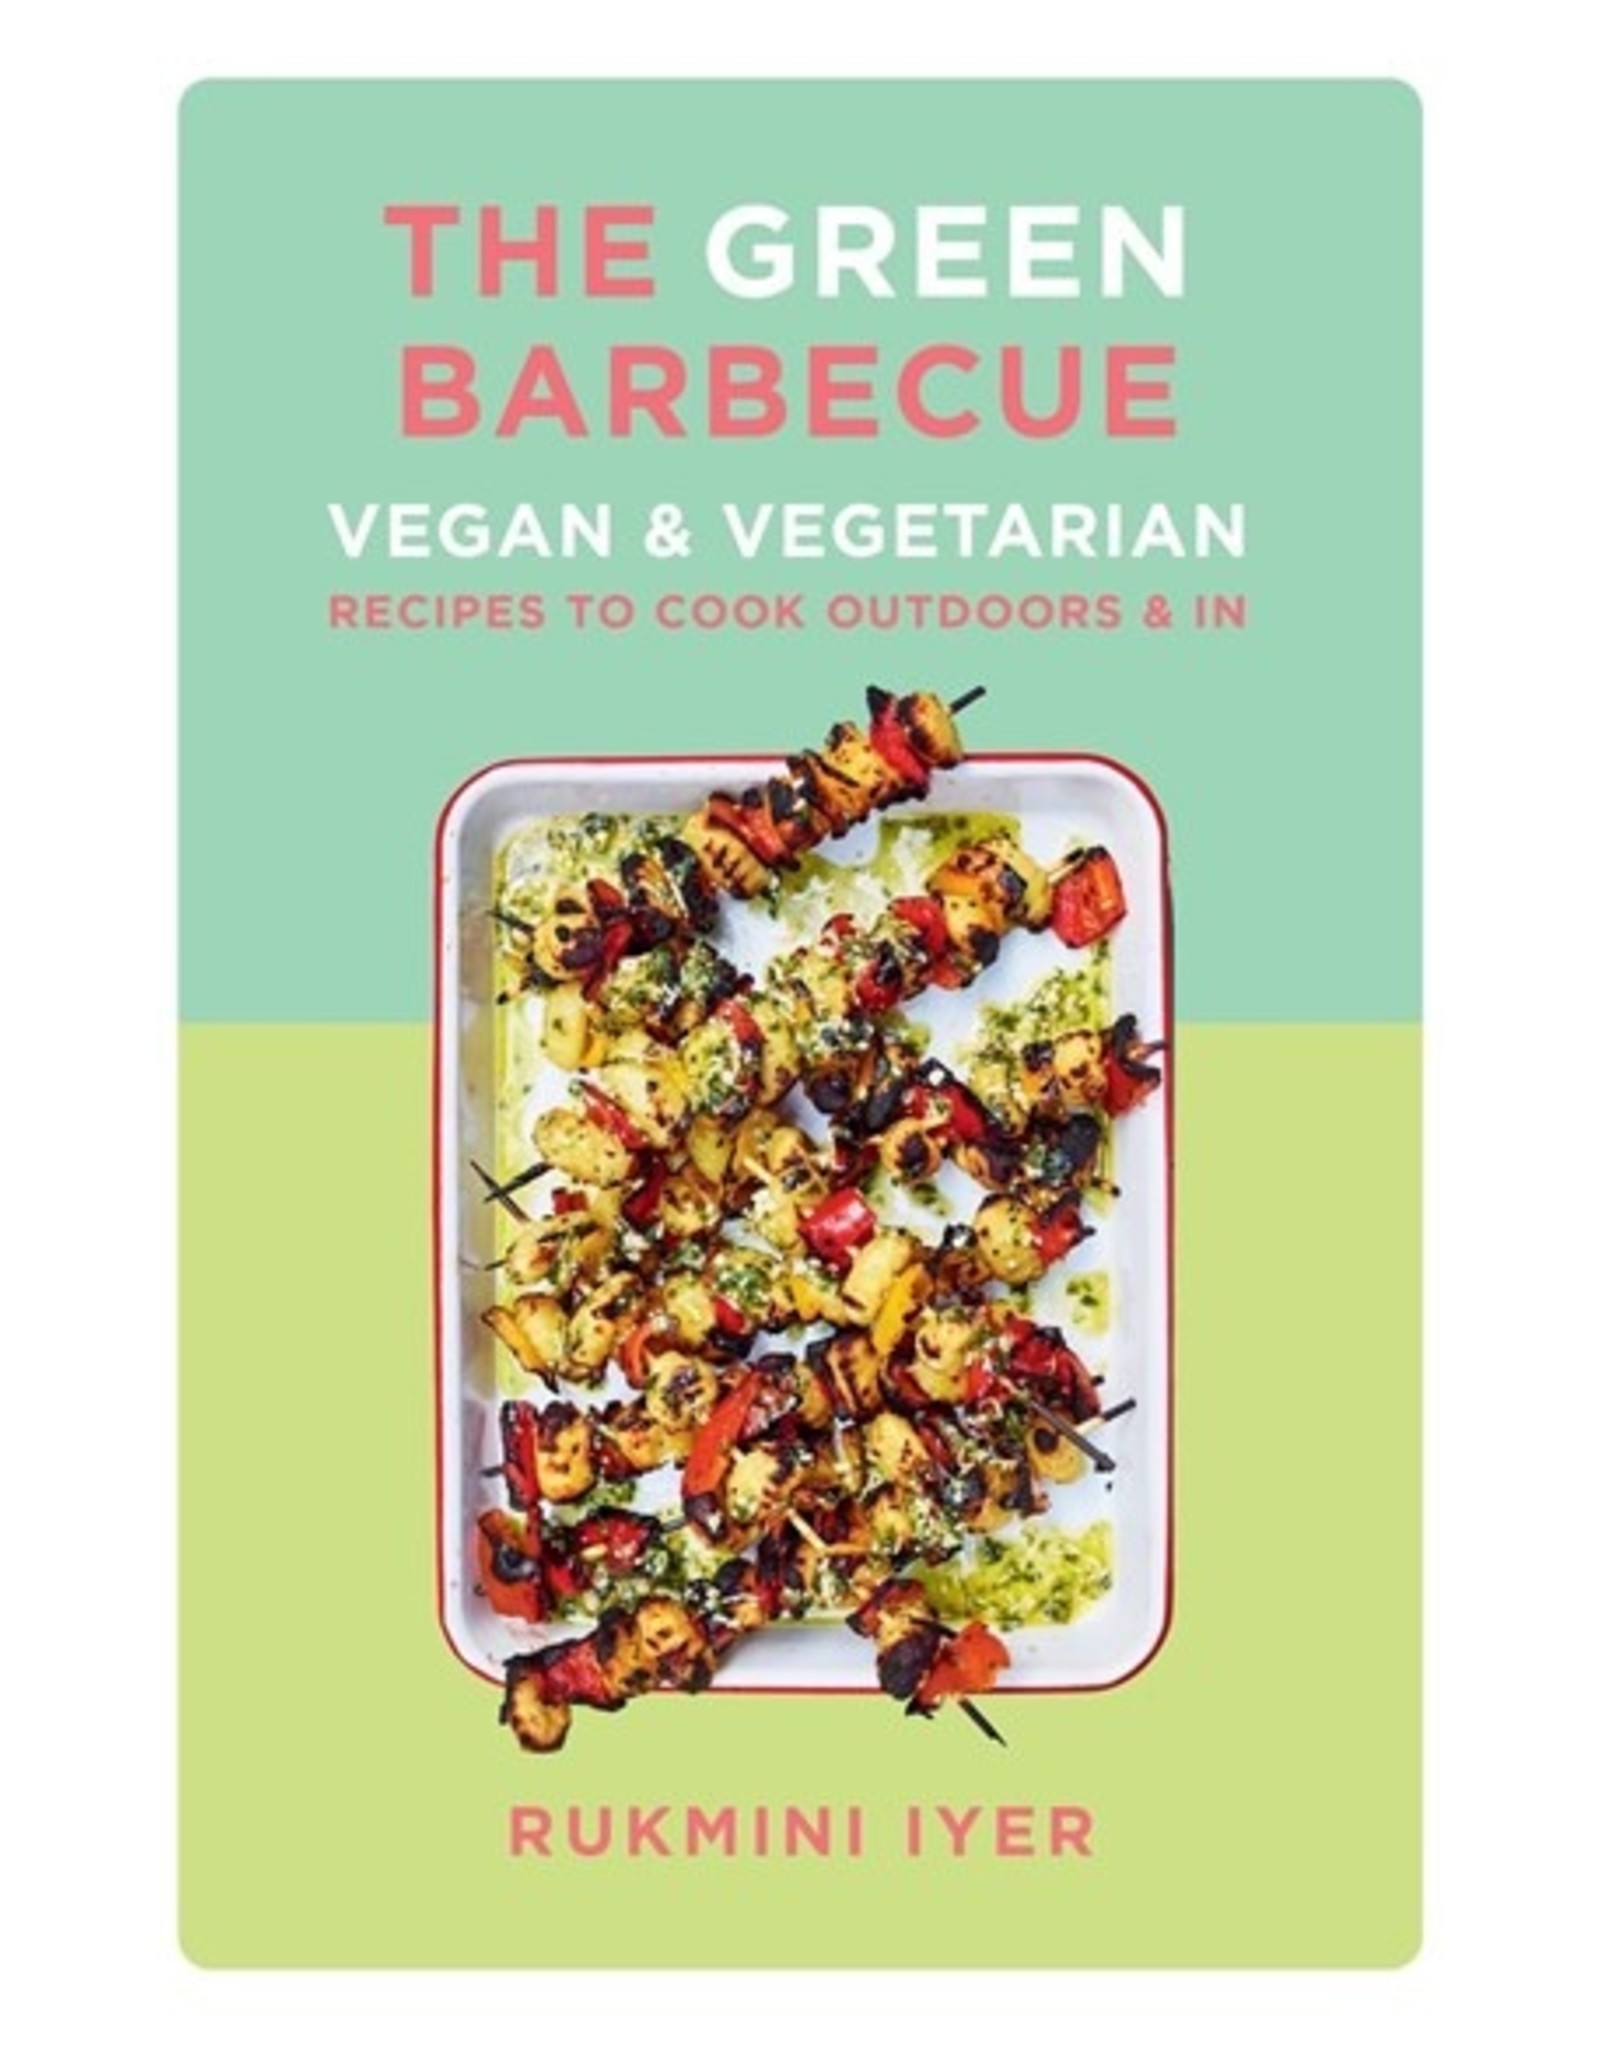 Books The Green Barbecue: Vegan & Vegetarian Recipes to cook outdoors and in by Rukmini Iyer